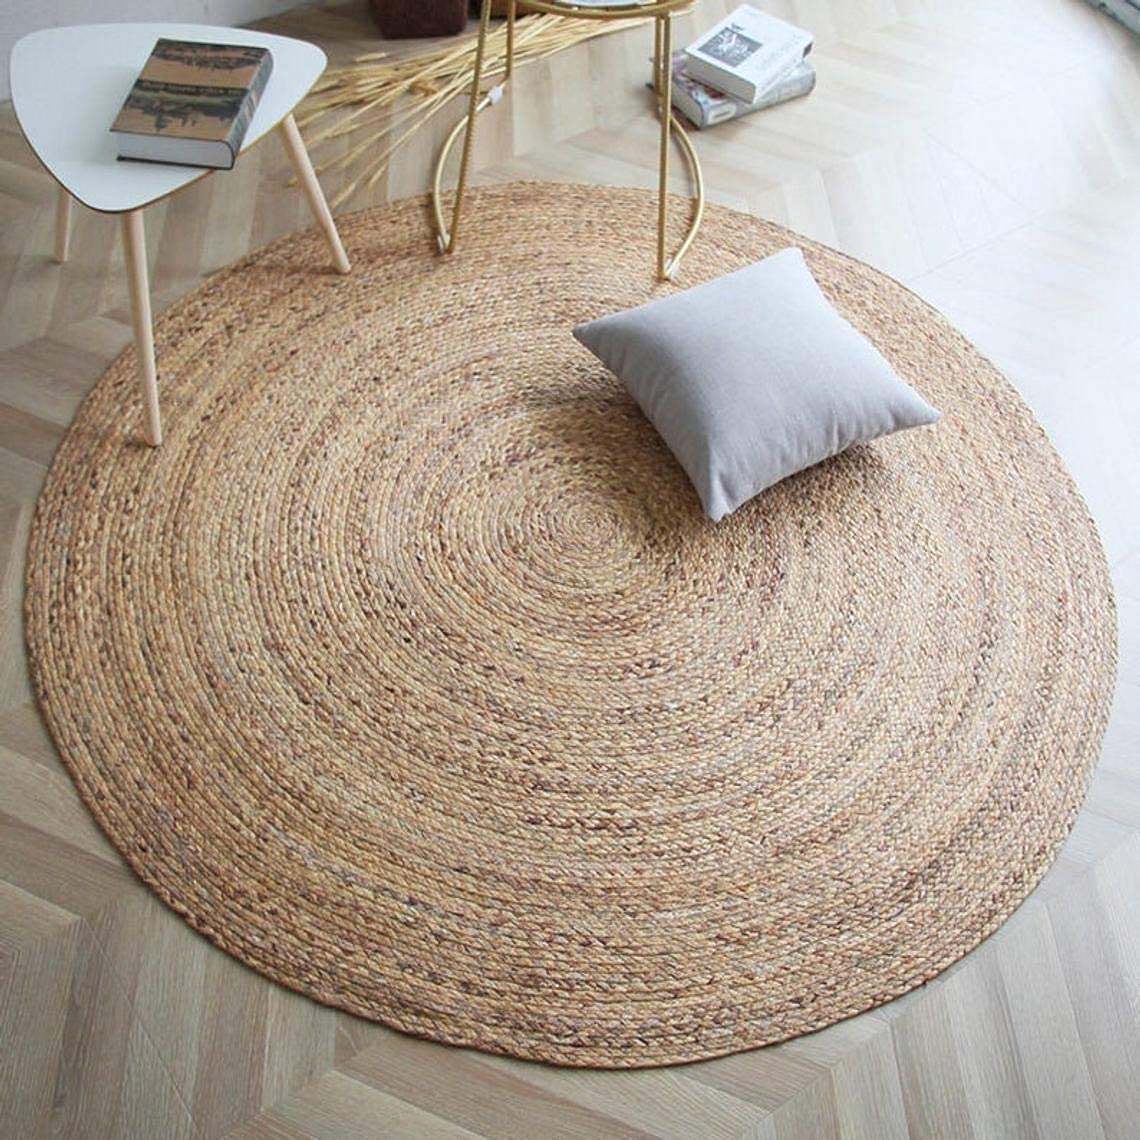 2 ft Round Colorful Natural Jute Chindi Sisal Woven Area Braided Rug Boho Indian 